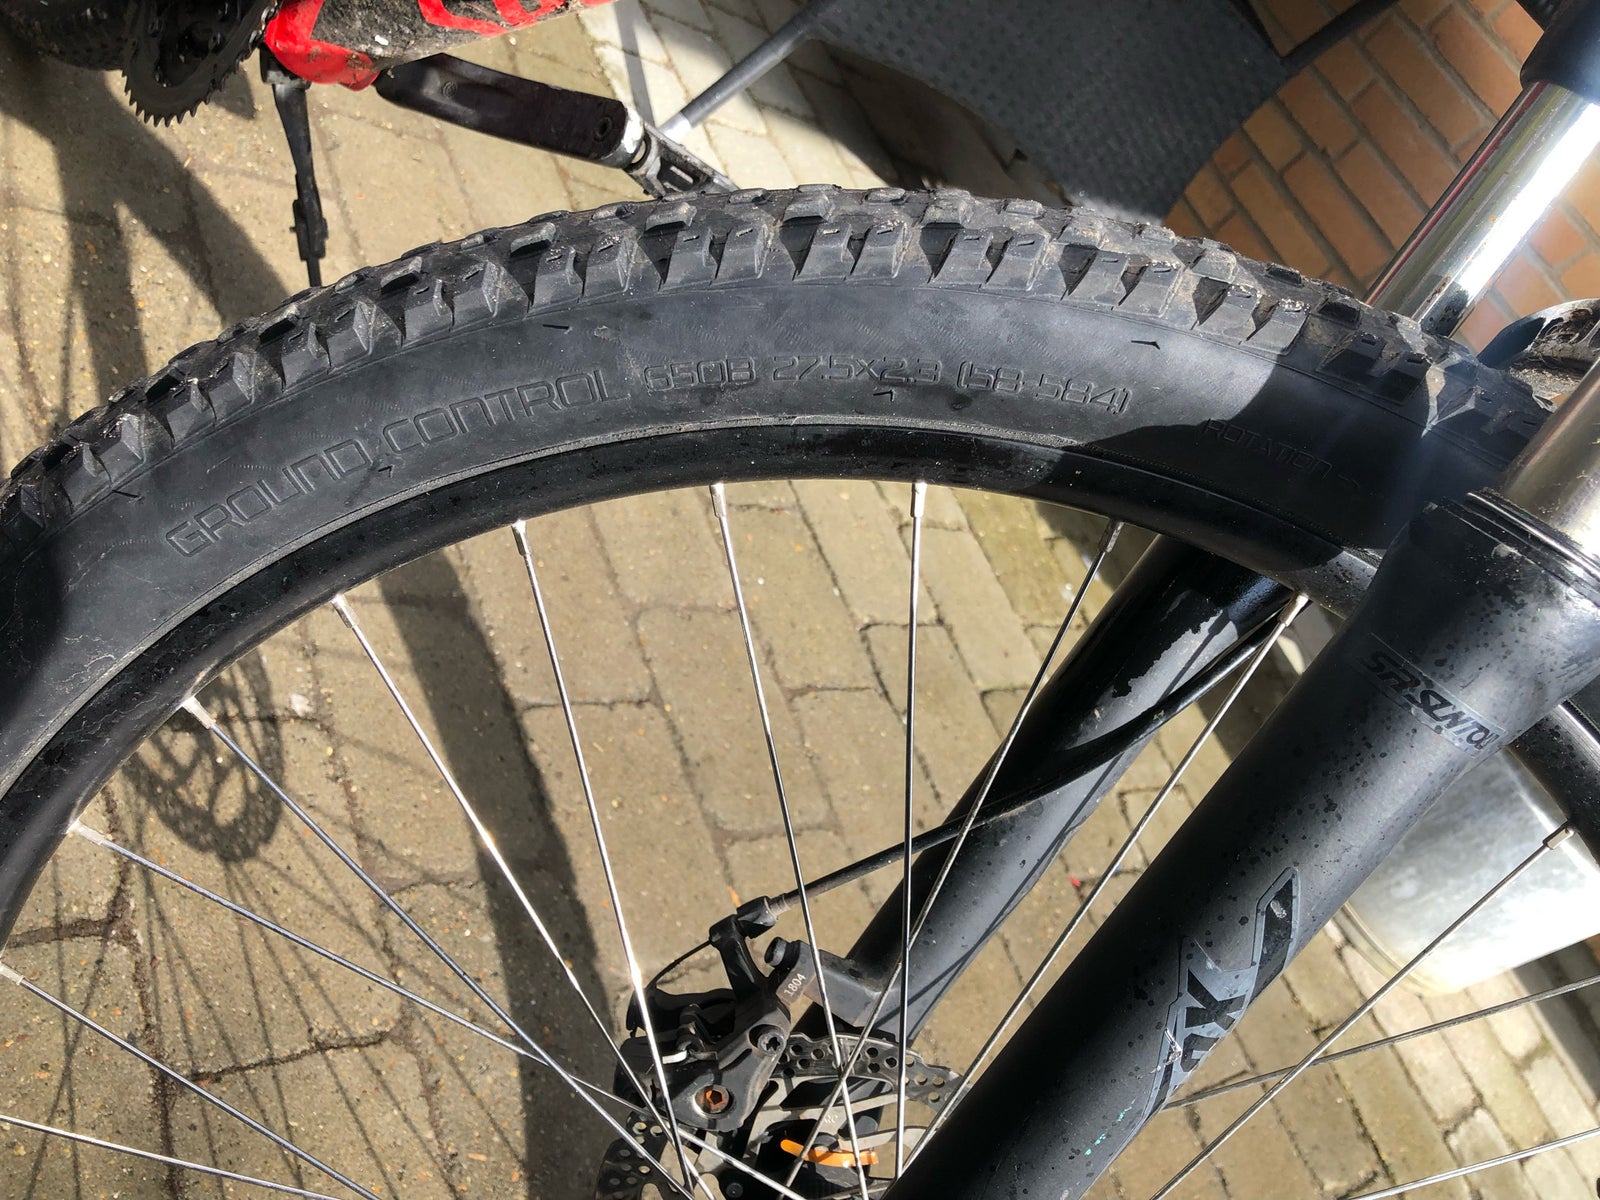 Specialized Pitch, anden mountainbike, 50 tommer